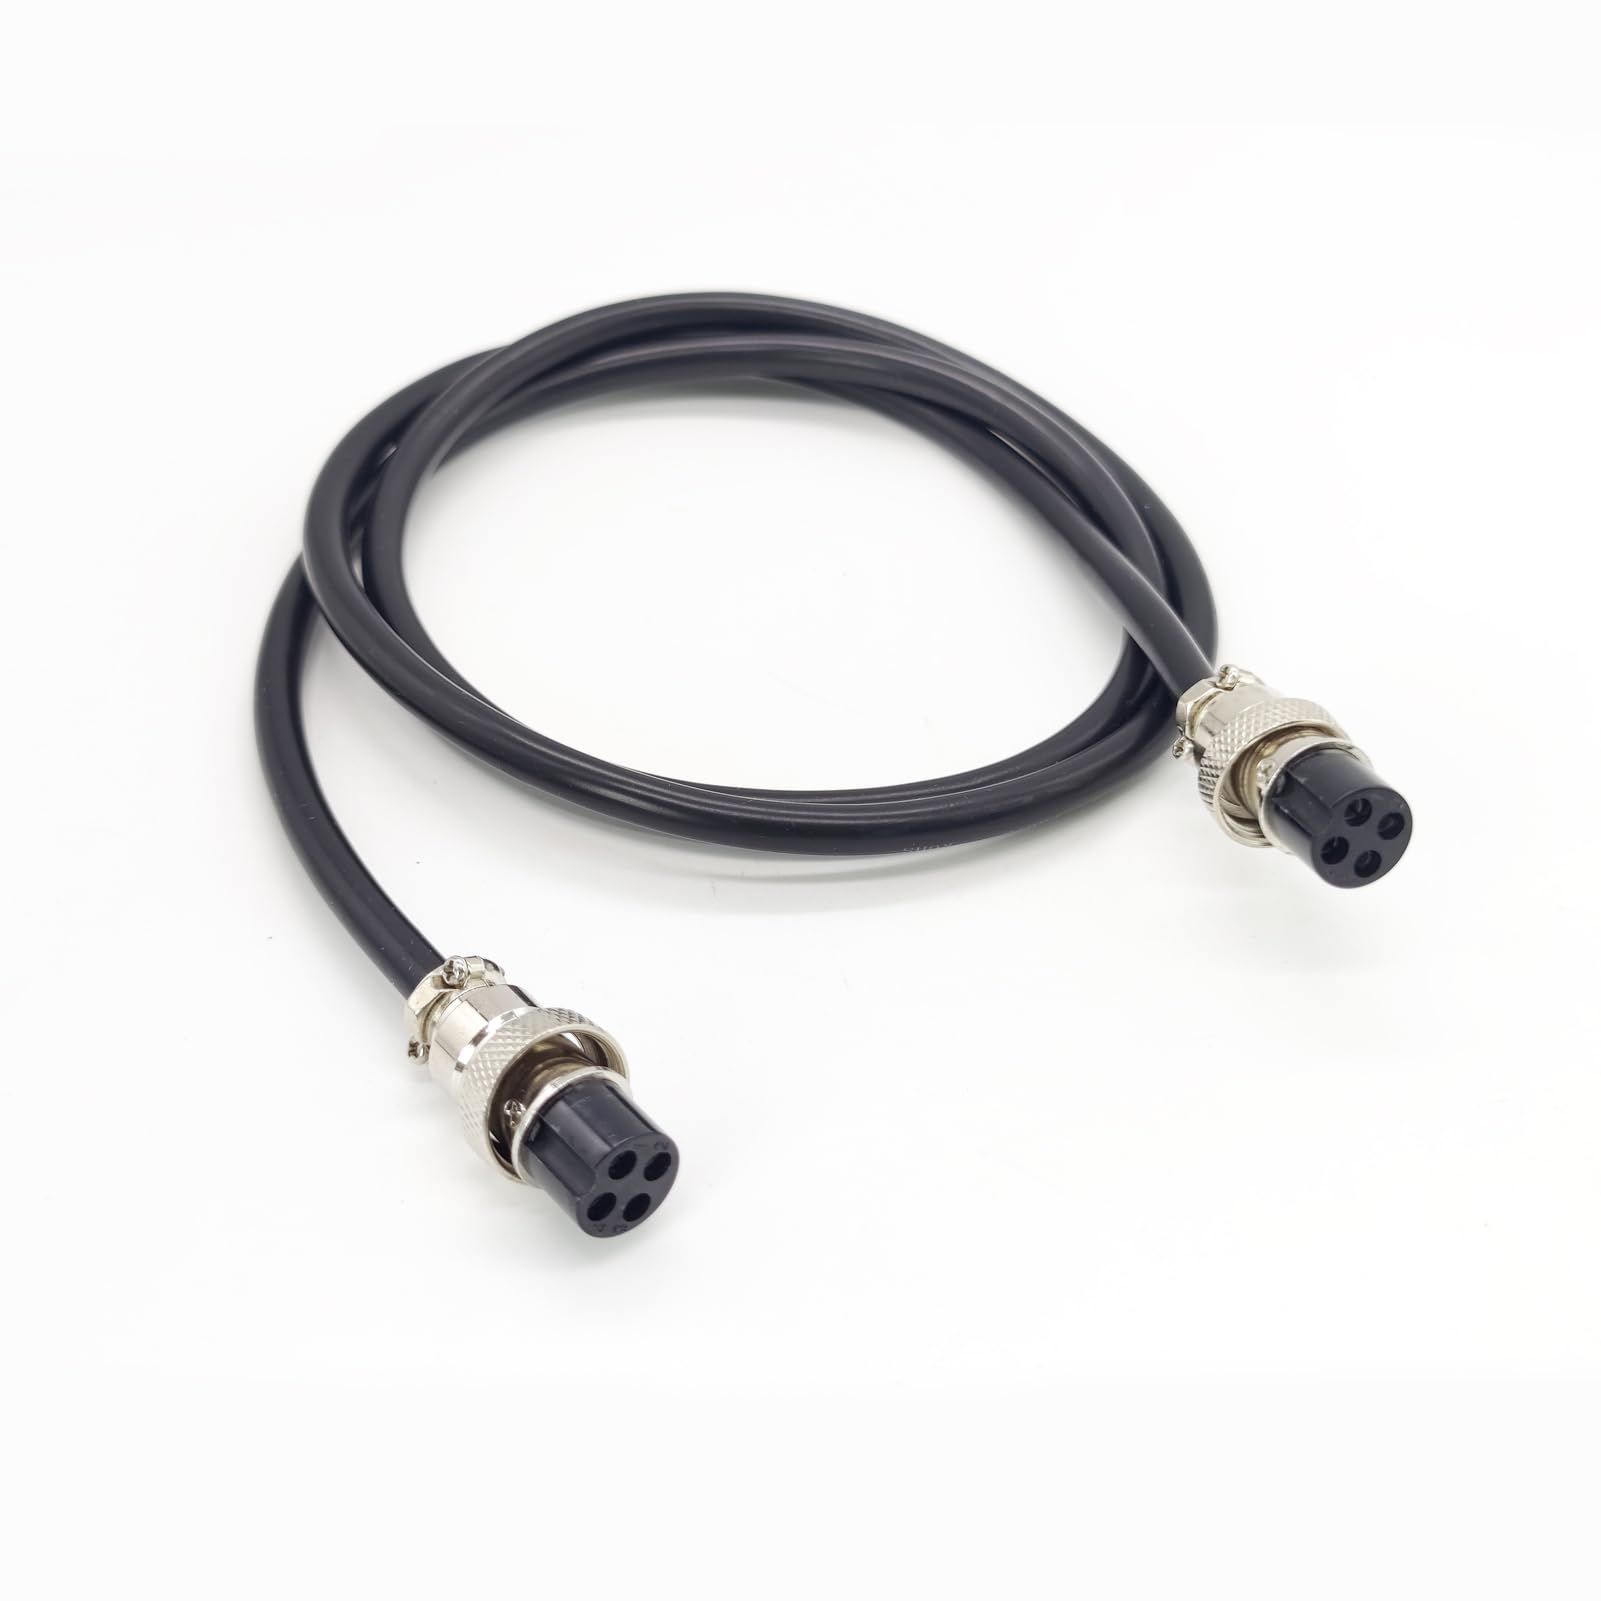 3.28 ft GX16 4 Pin Cable Double Female Head Aviation Cordset, GX16 4 Pin Panel Mount Circular Metal Aviation Connector Adapter Female to Female 20AWG (1Meter)